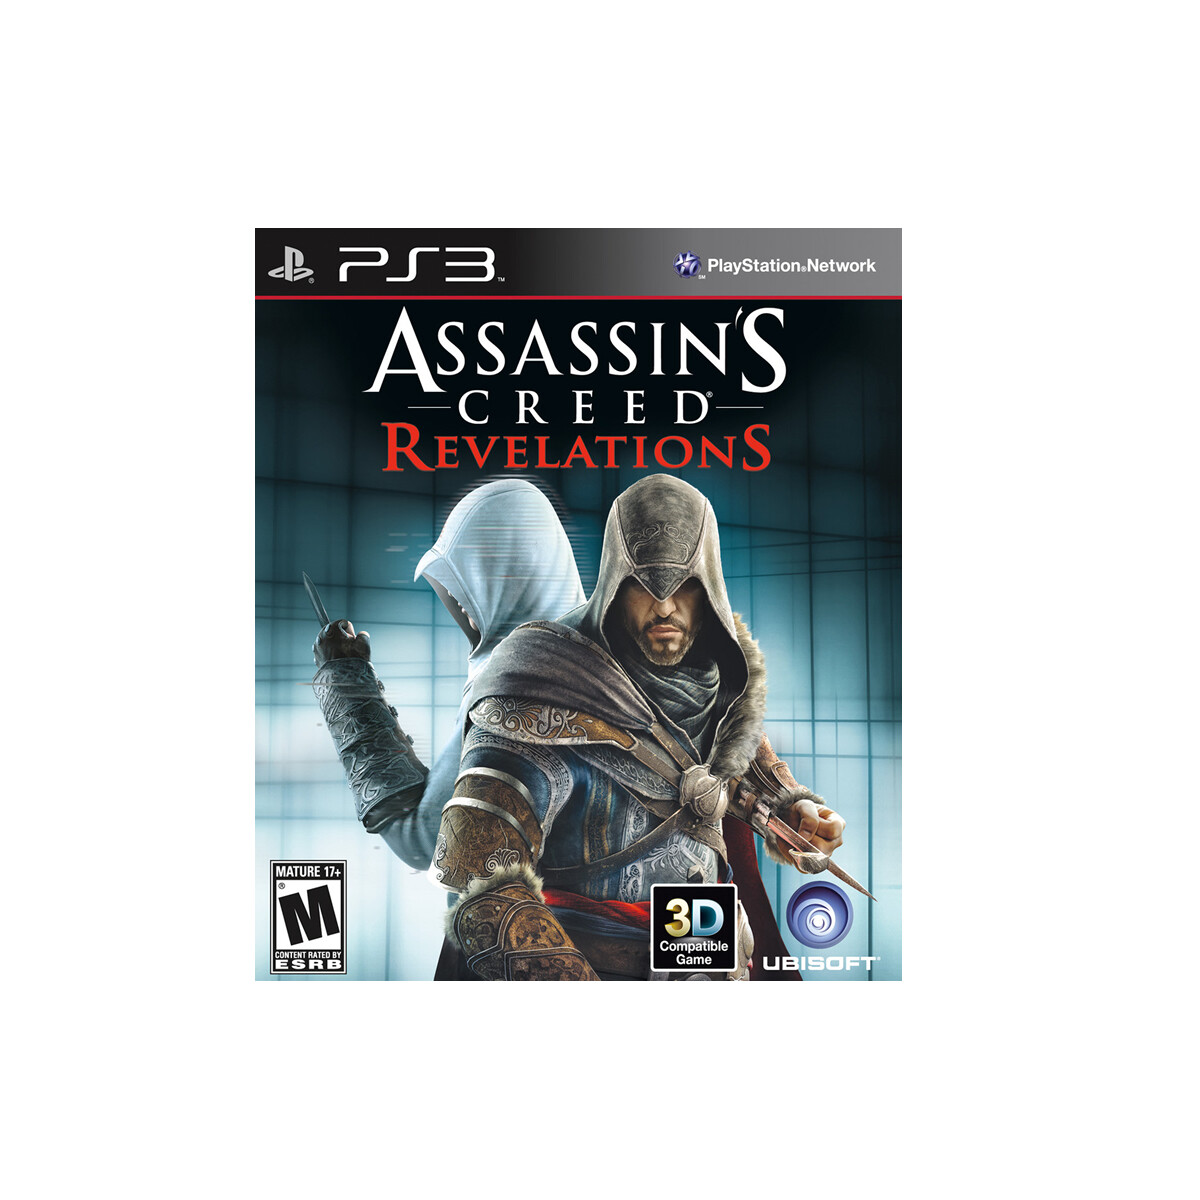 PS3 ASSASSIN'S CREED: REVELATIONS 